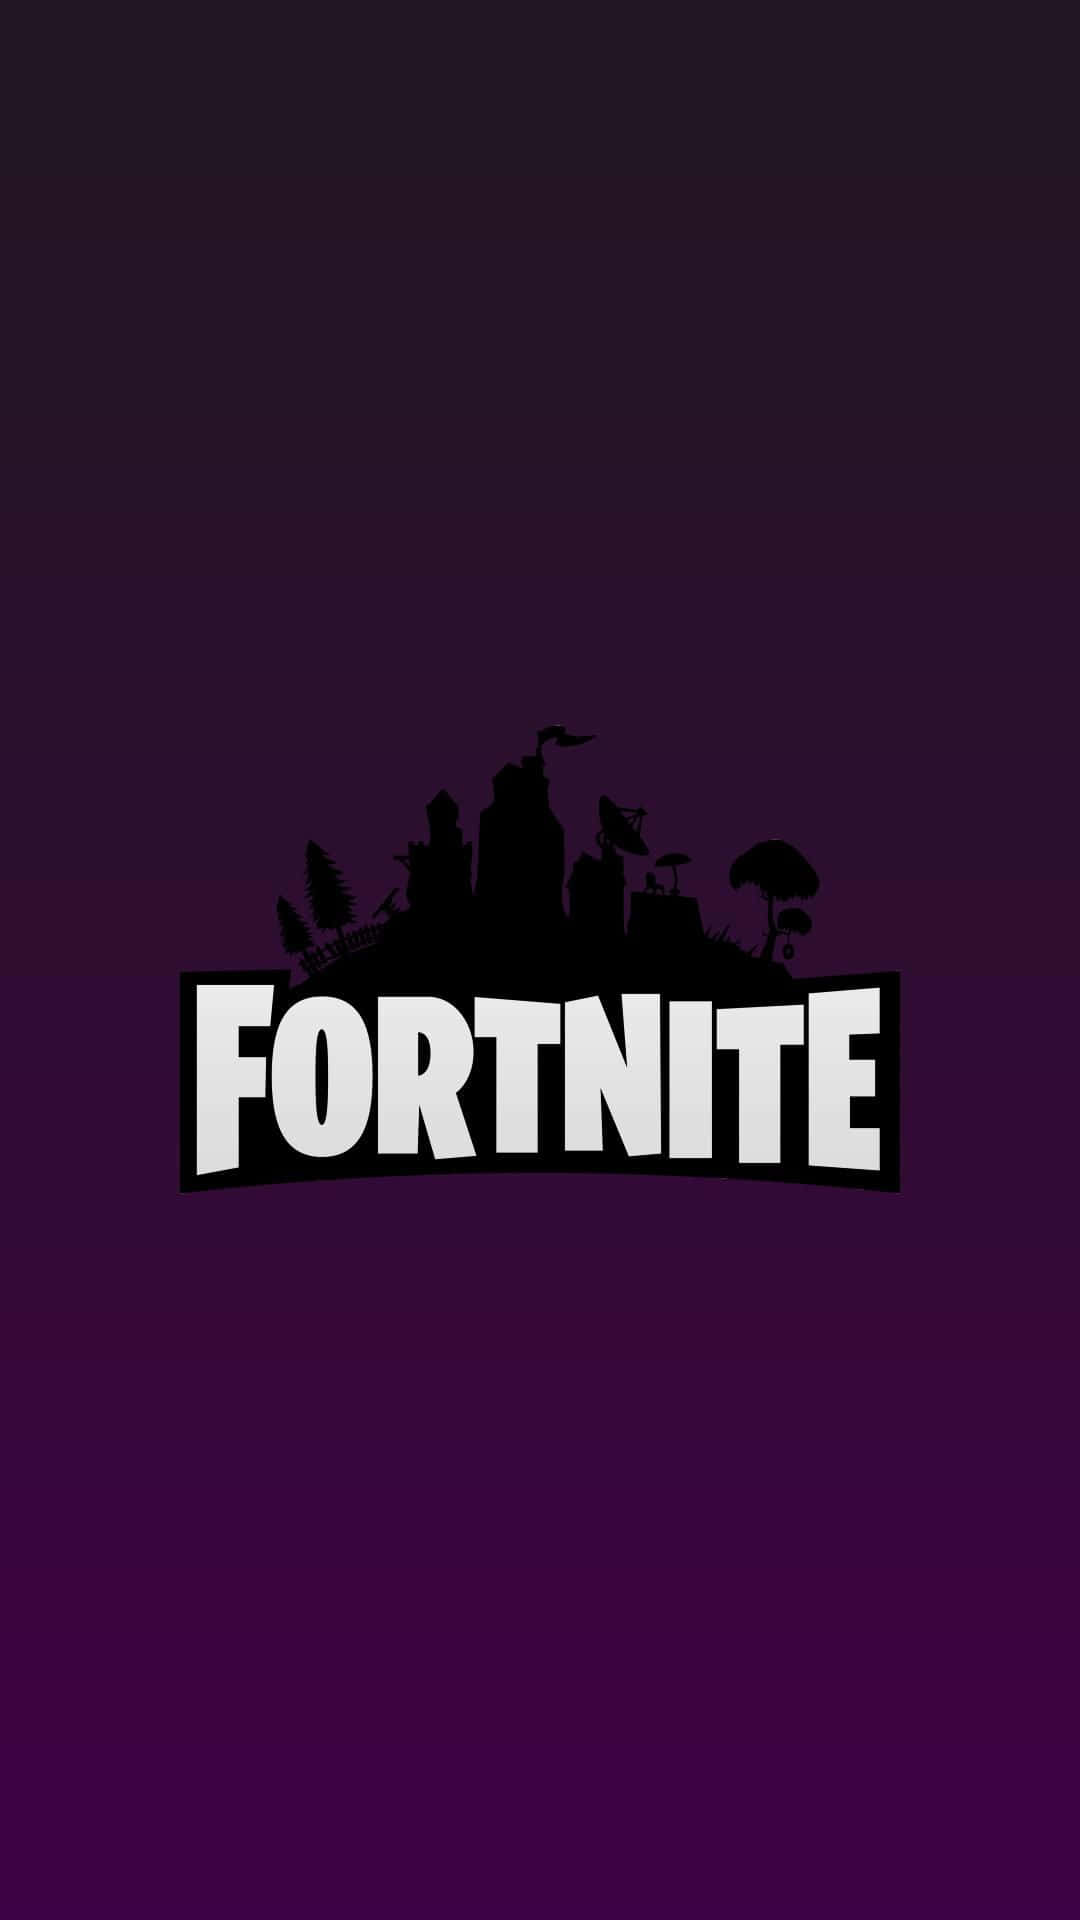 Unleash your Wildcat moves with Fortnite Wallpaper